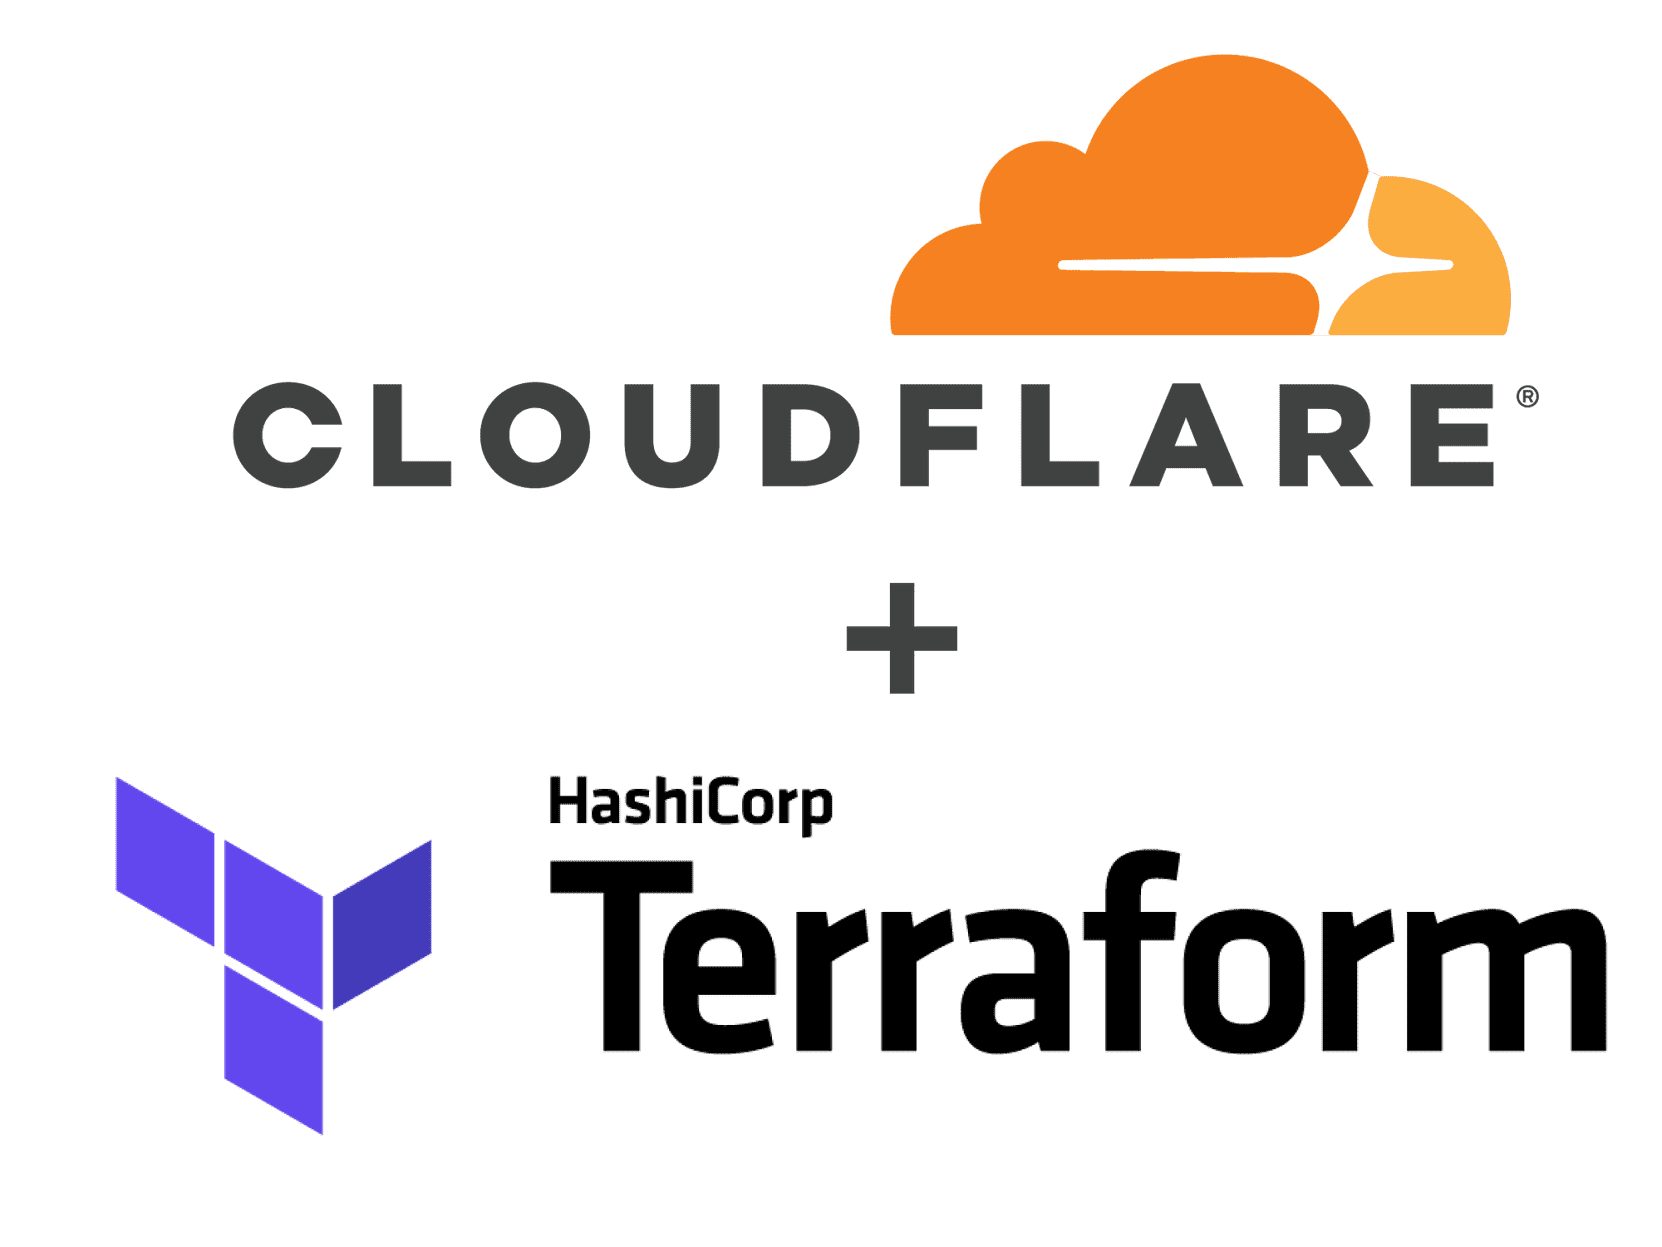 Terraforming Cloudflare: in quest of the optimal setup